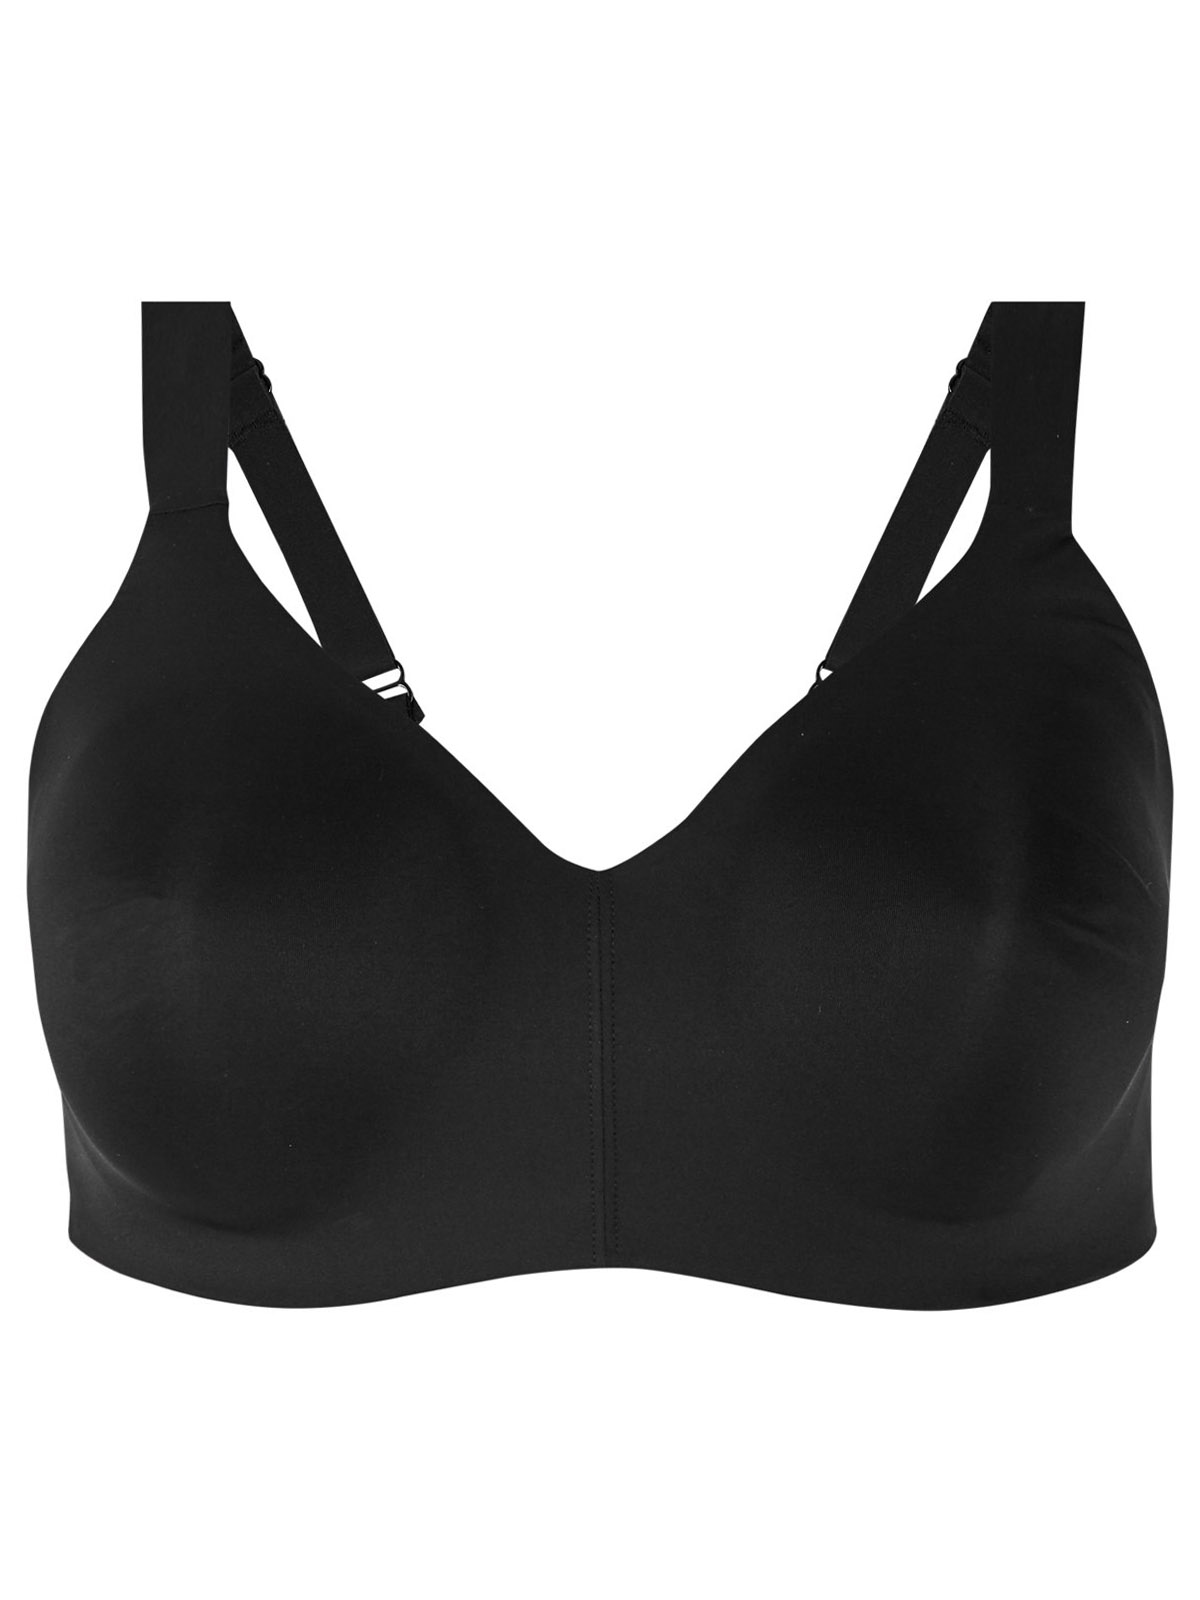 Marks and Spencer - - M&5 ASSORTED Plain & Lace Non-Padded Bras - Size ...